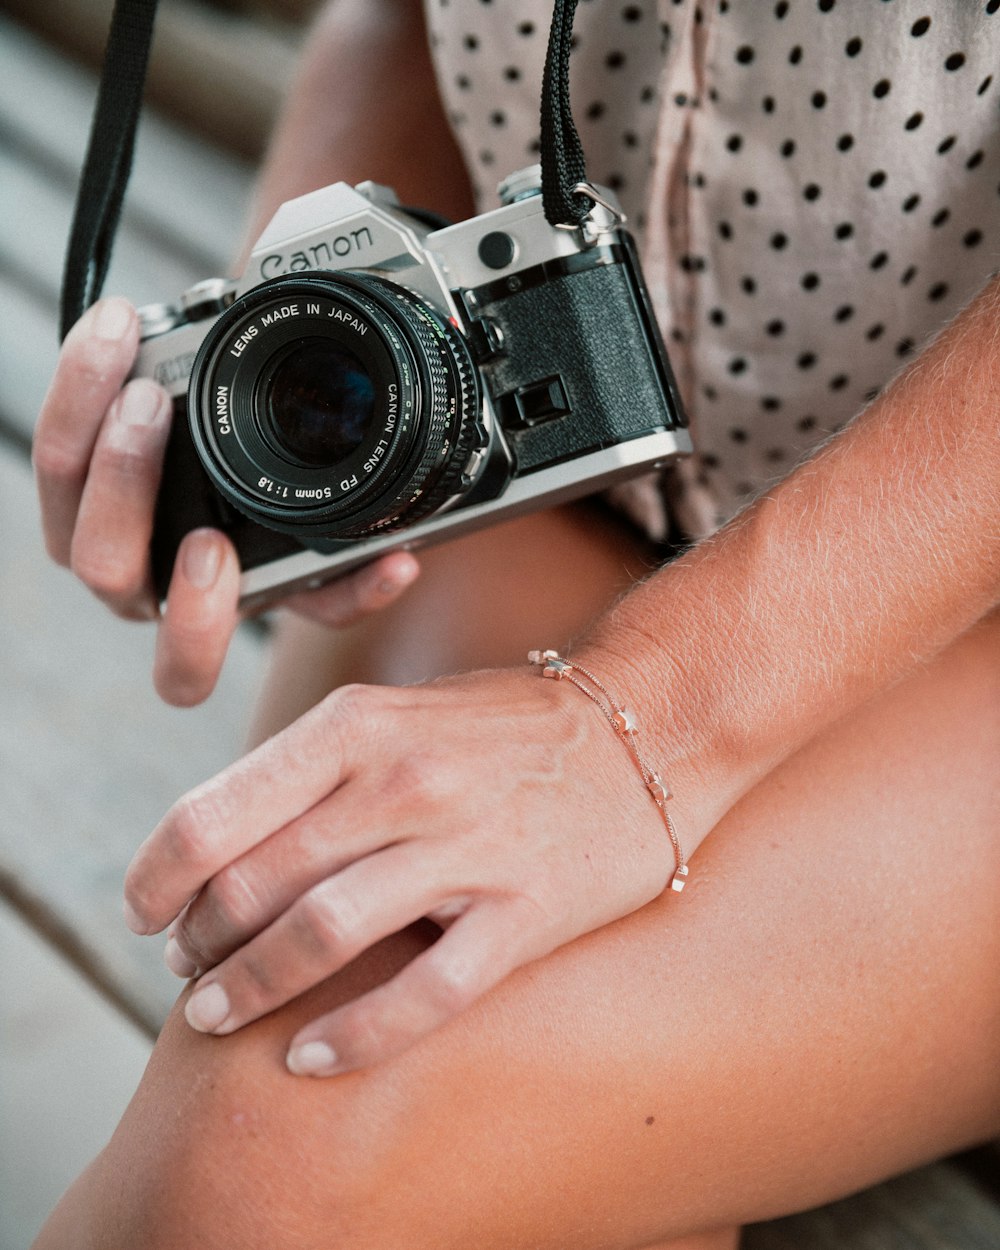 woman holding black and silver camera